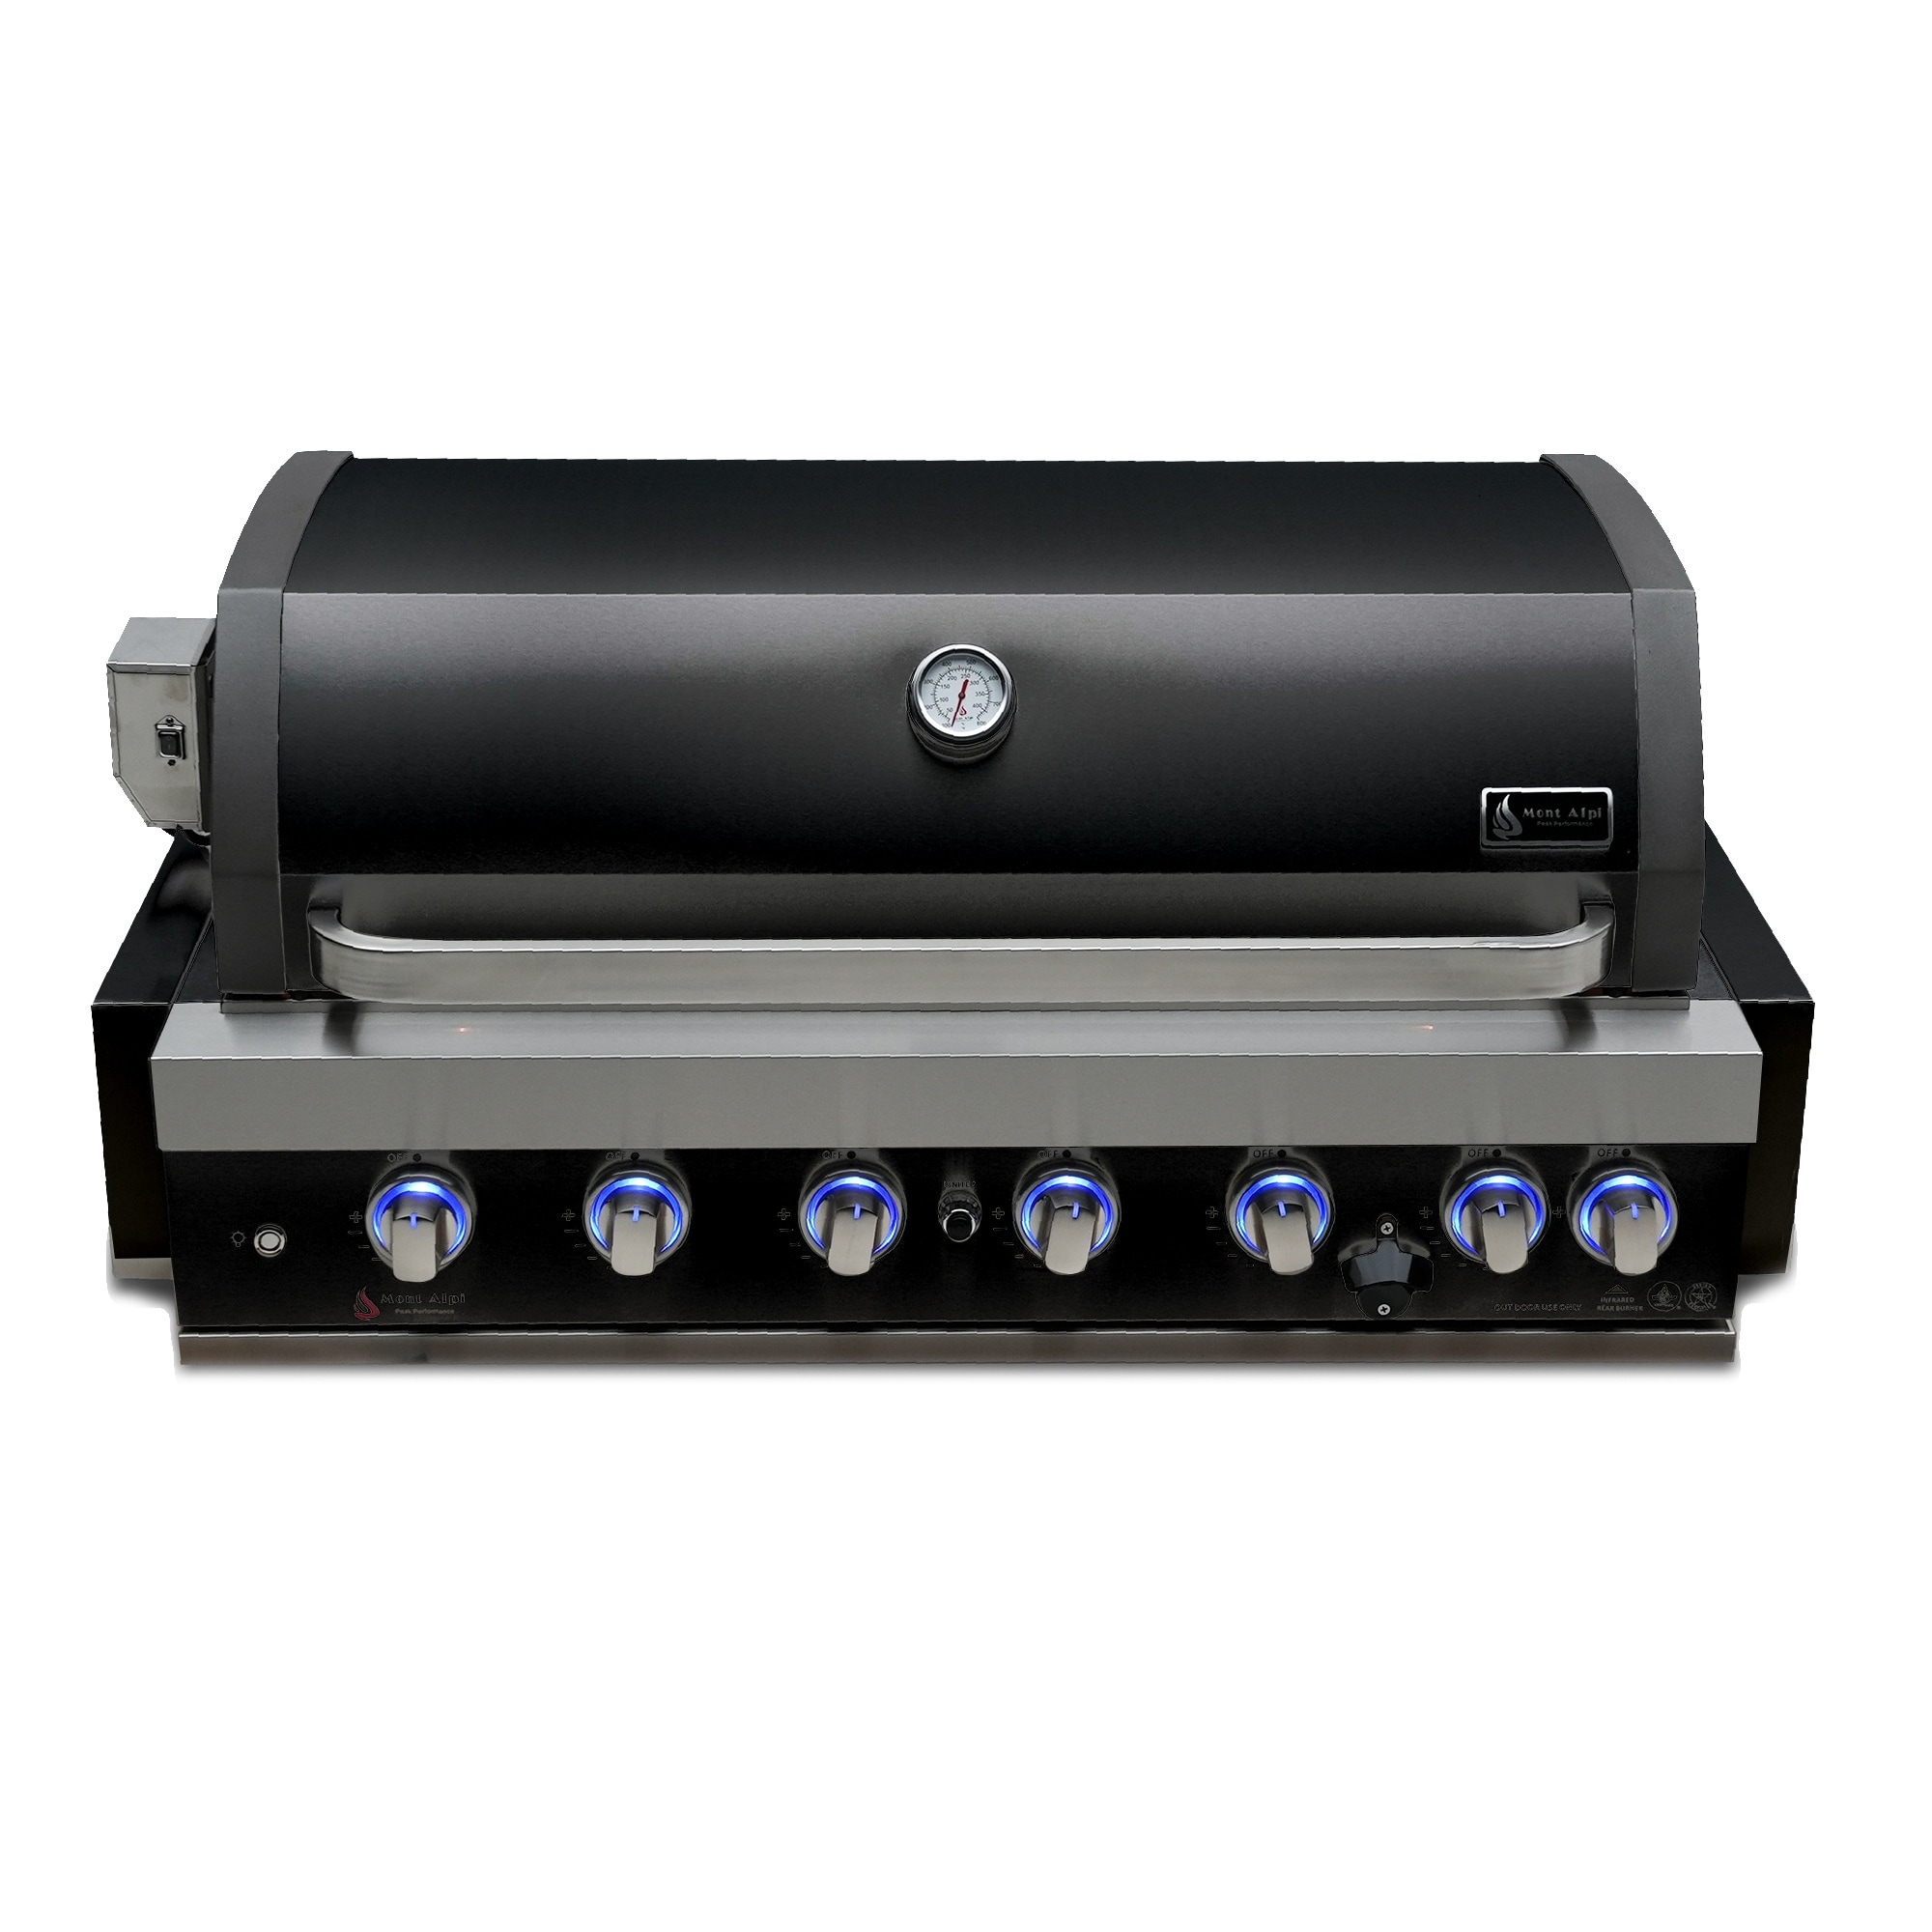 Mont Alpi Black Stainless Steel Mabi805 44-inch 6-burner 87000 Btu Liquid Propane / Natural Gas Built-in Outdoor Barbecue Grill